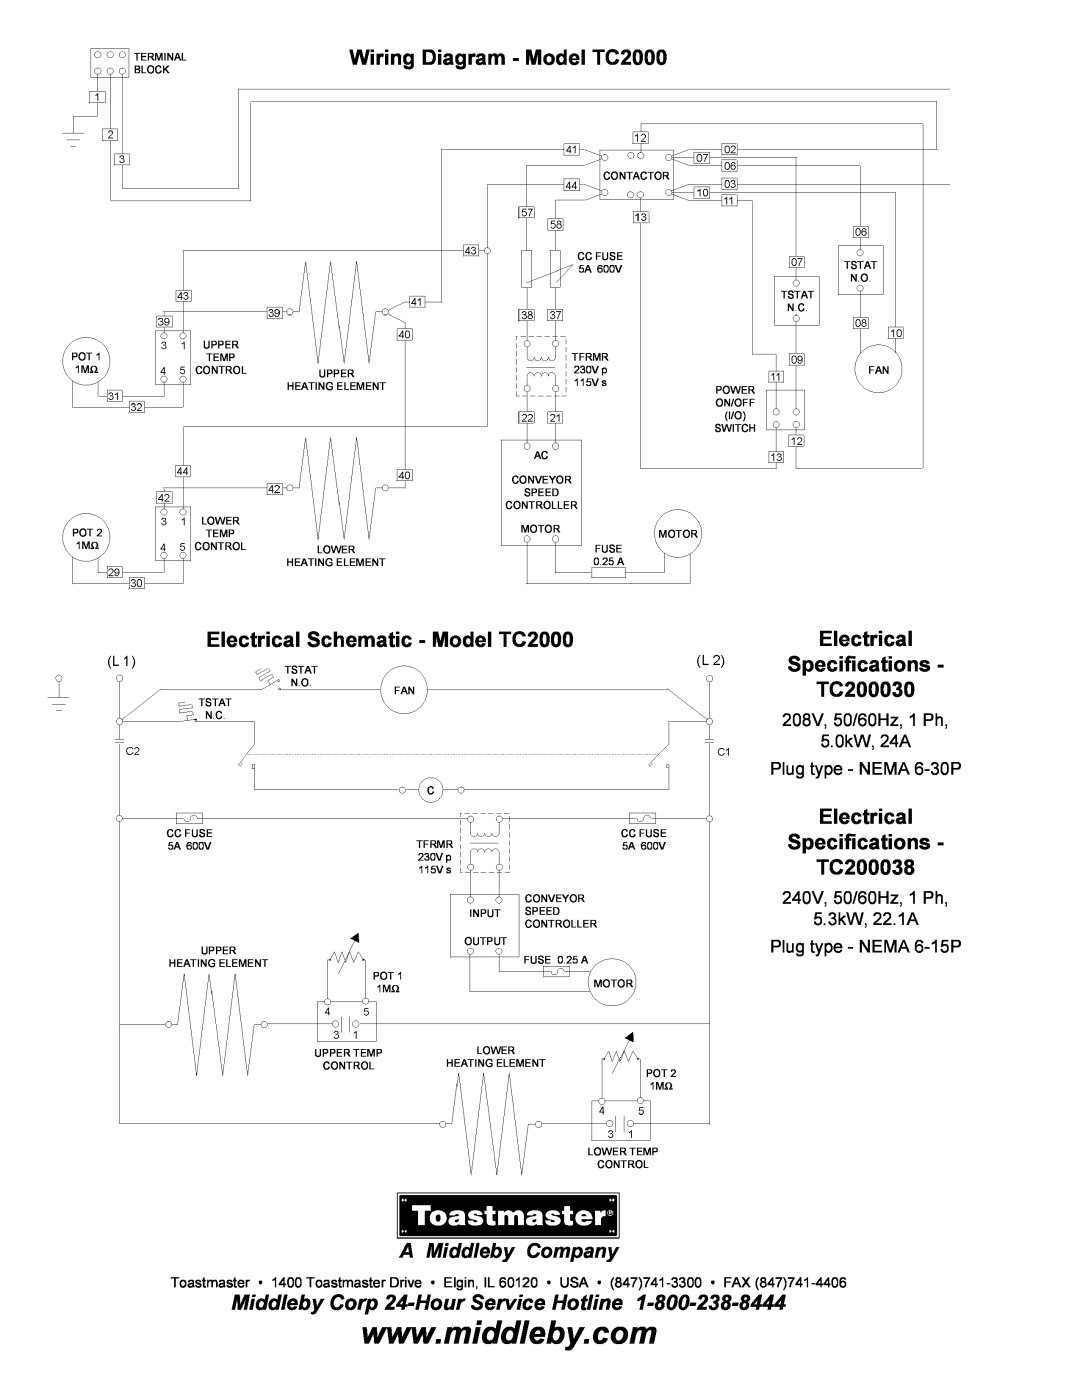 Toastmaster Wiring Diagram - Model TC2000, Electrical Schematic - Model TC2000, Specifications, TC200030, TC200038 